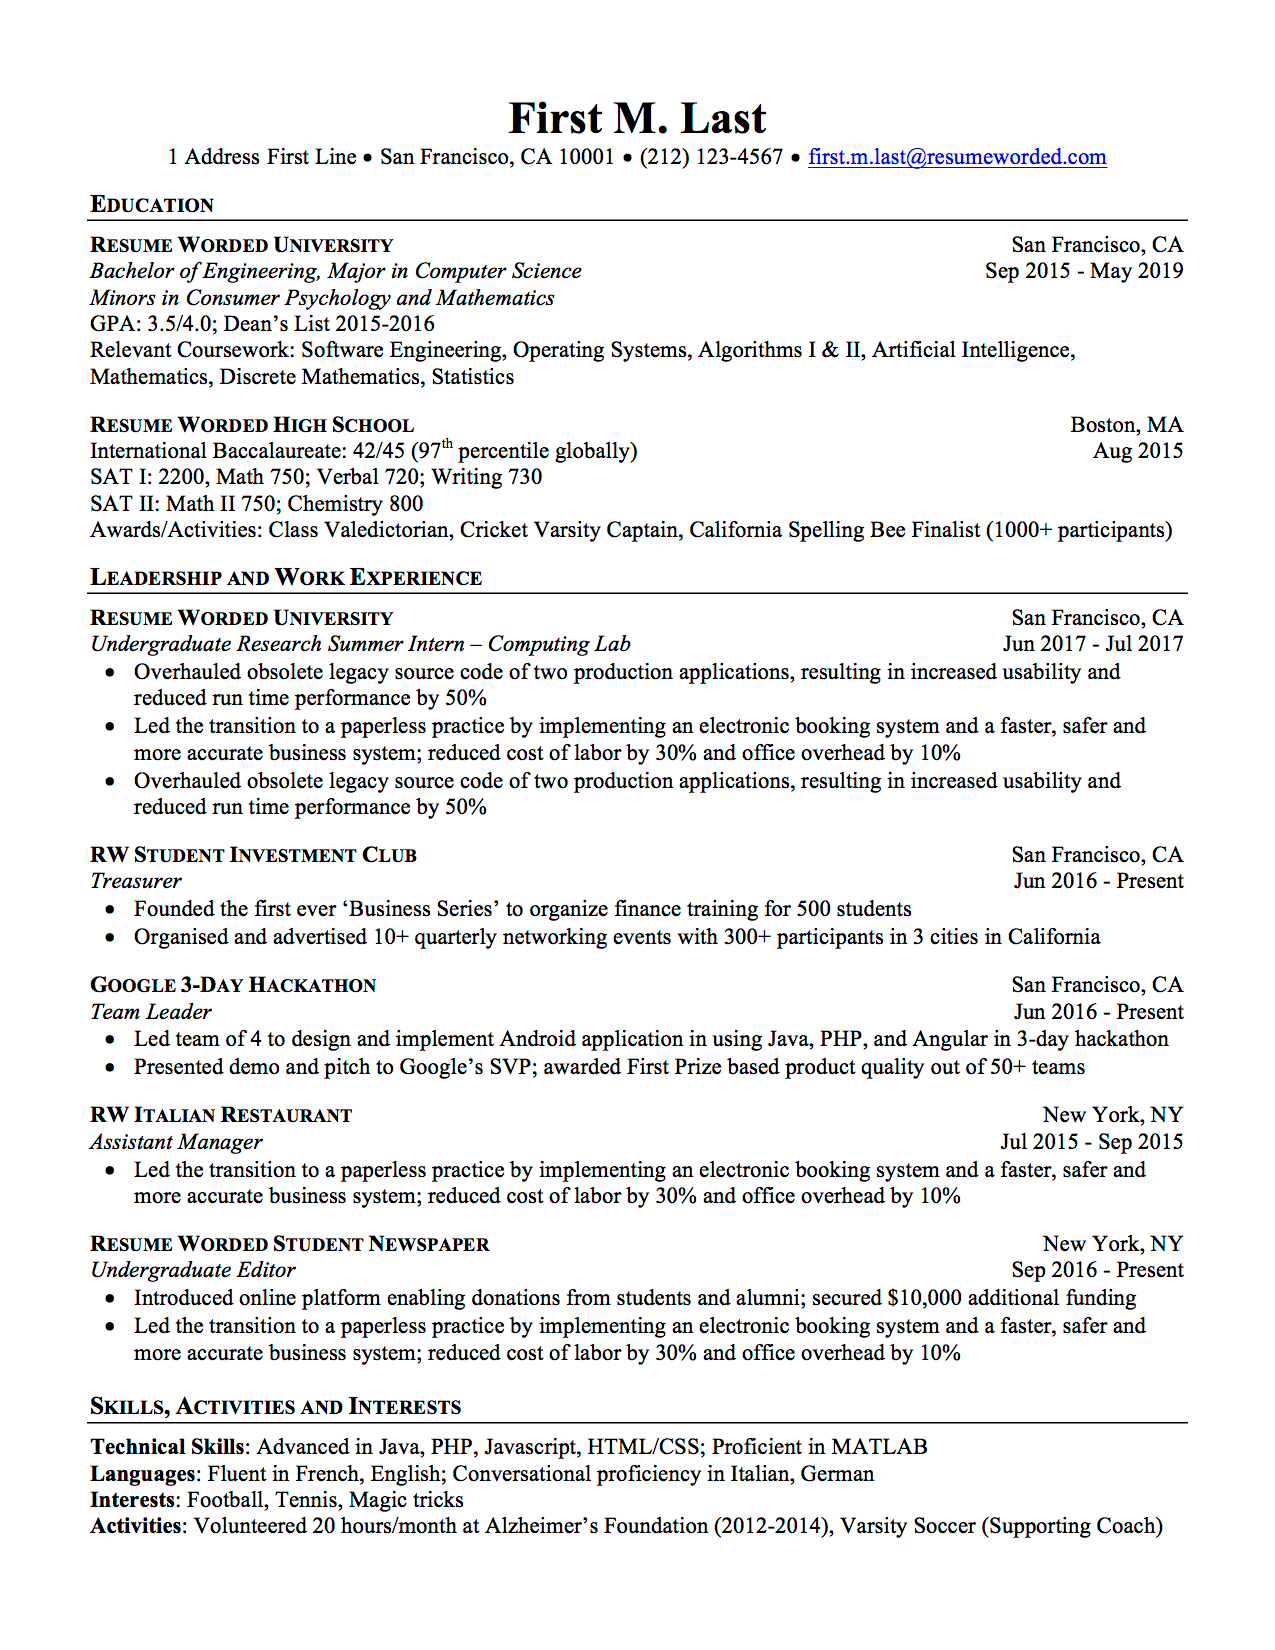 Student Resume Template Professional Ats Resume Templates For Experienced Hires And College